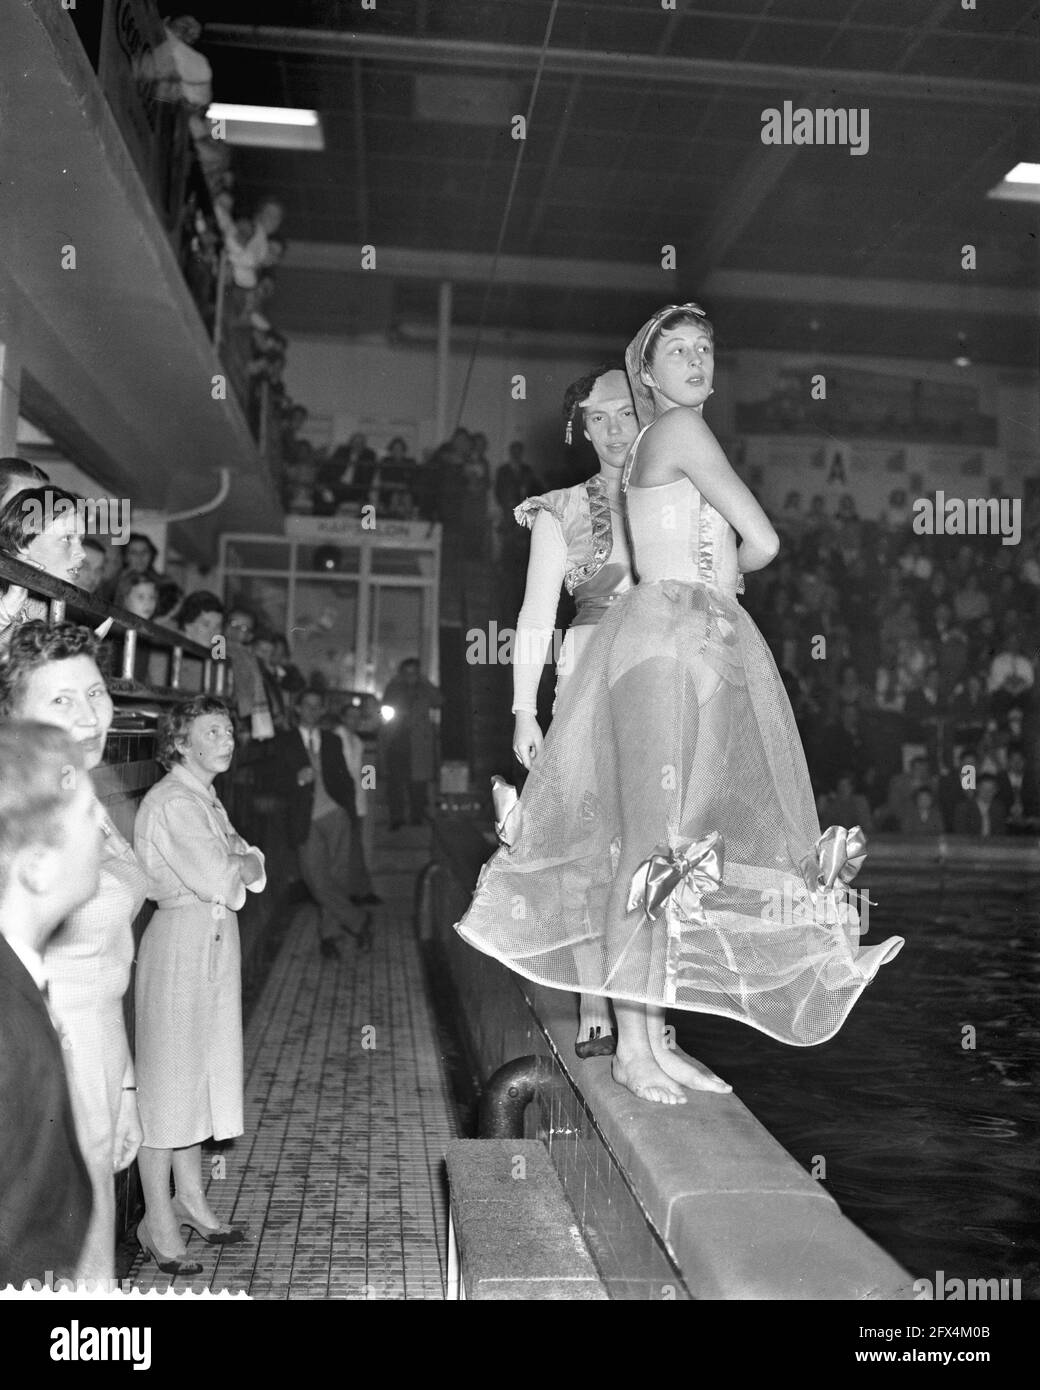 European Art Swimming Competitions to mark the 20th anniversary of the Amsterdam Swimming Association Admiral de Ruyter, Ms. Balkenende and $, December 14, 1958, The Netherlands, 20th century press agency photo, news to remember, documentary, historic photography 1945-1990, visual stories, human history of the Twentieth Century, capturing moments in time Stock Photo